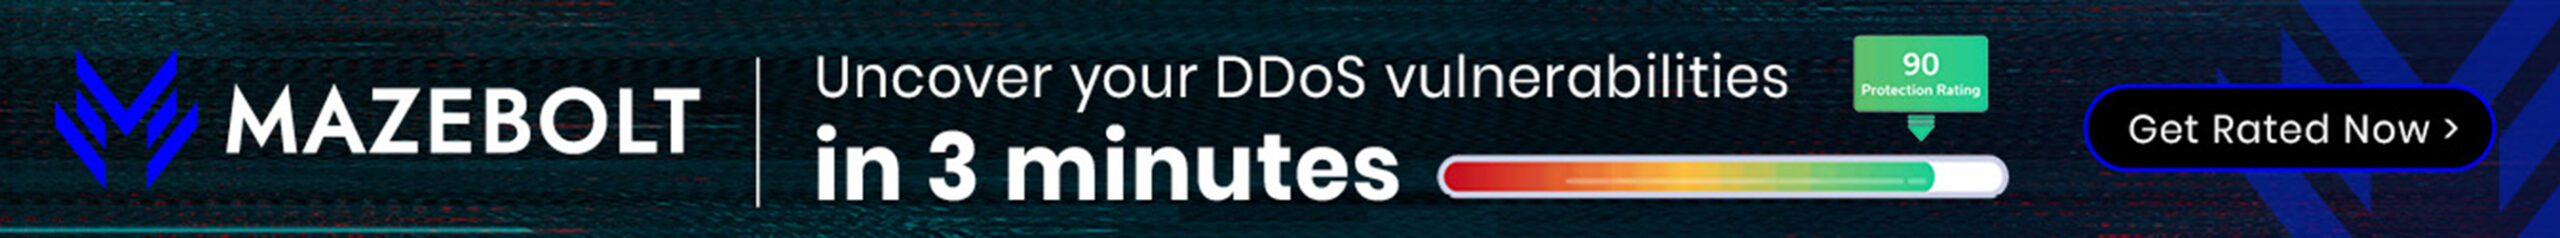 AD - Discover your DDoS Vulnerabilities in 3 Minutes 